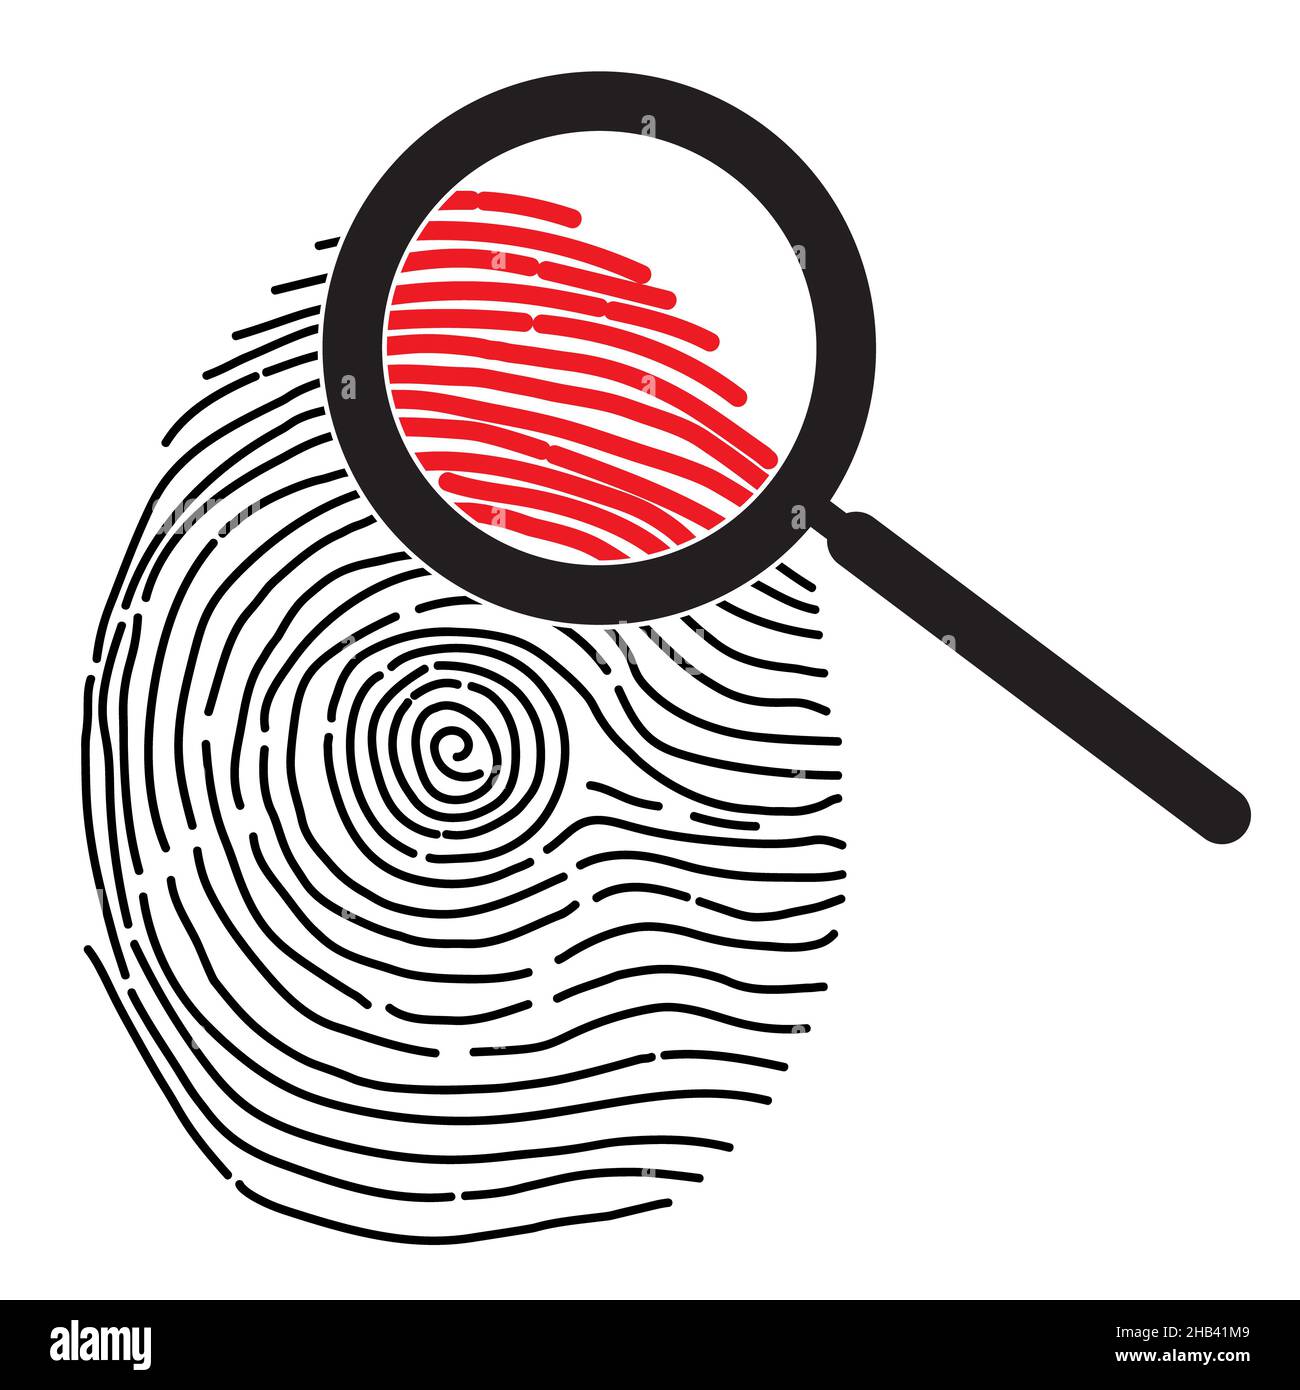 Crime icon on white background. Evidence sign. finger print with magnifying glass symbol. flat style. Stock Photo